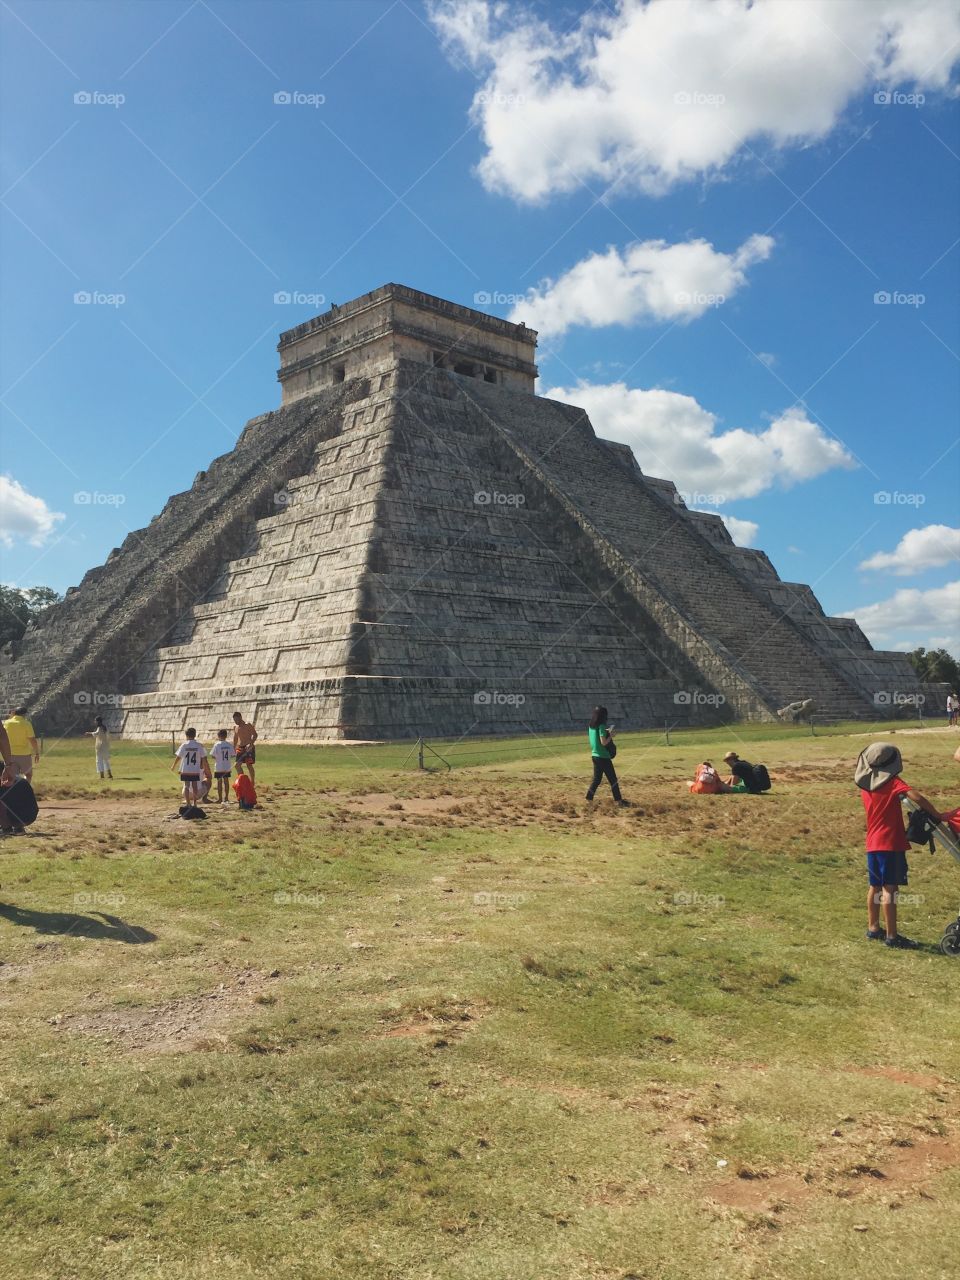 A rare image of Chichen Itza, the famous Mayan Ruin, featuring sunny blue skies and minimal tourists in the shot.